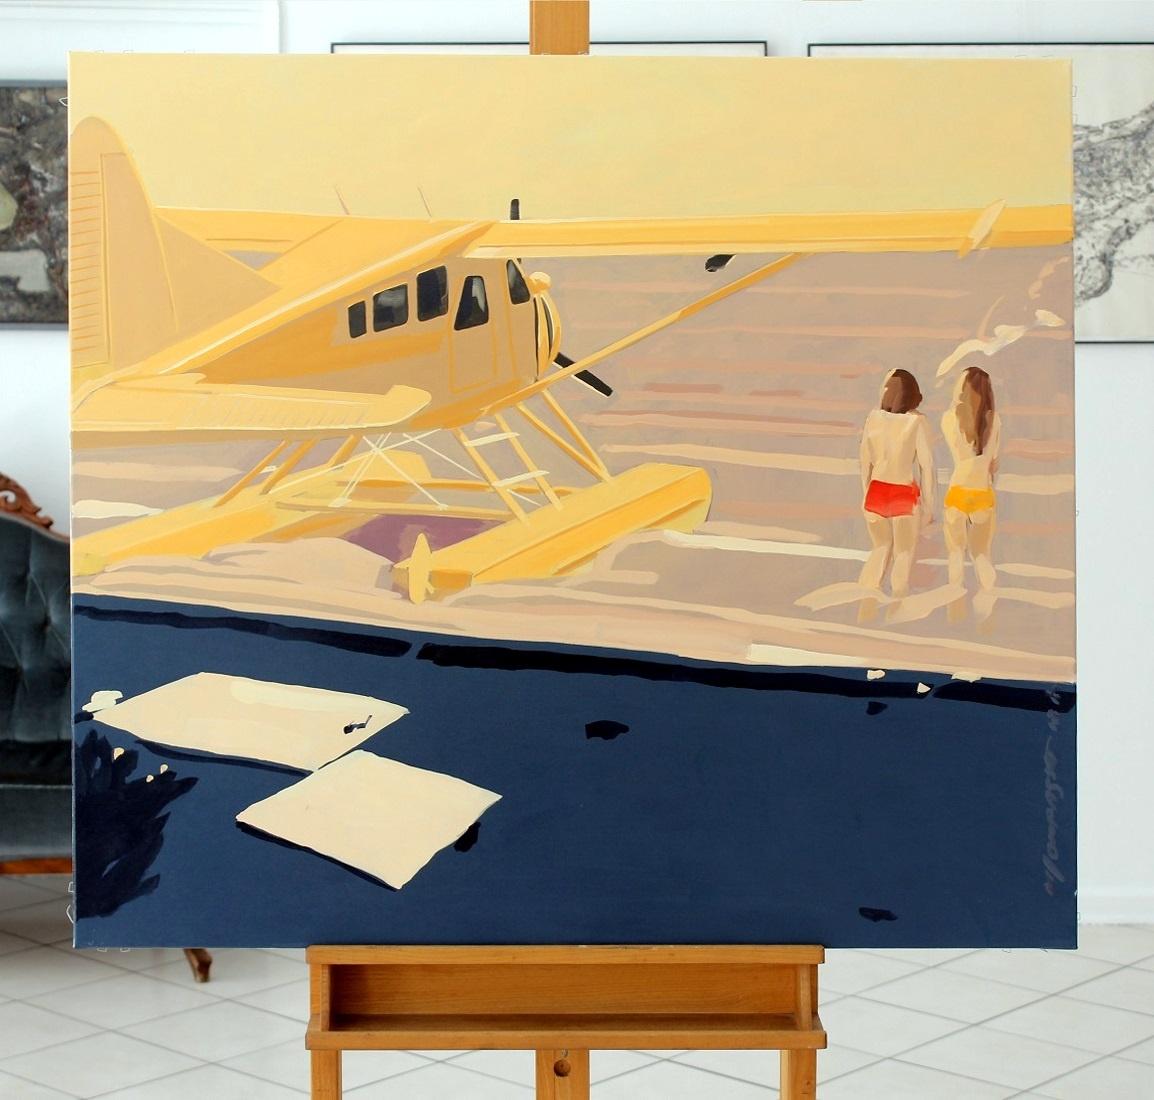 Oil painting depicting a yellow, vintage hydroplane and two women painted by Marek Okrassa, who was twice awarded with a grant from the Ministry of Culture and Arts and in 1999, the Silver Spur in 2000, the honourable mention of Franciszka Eibisch